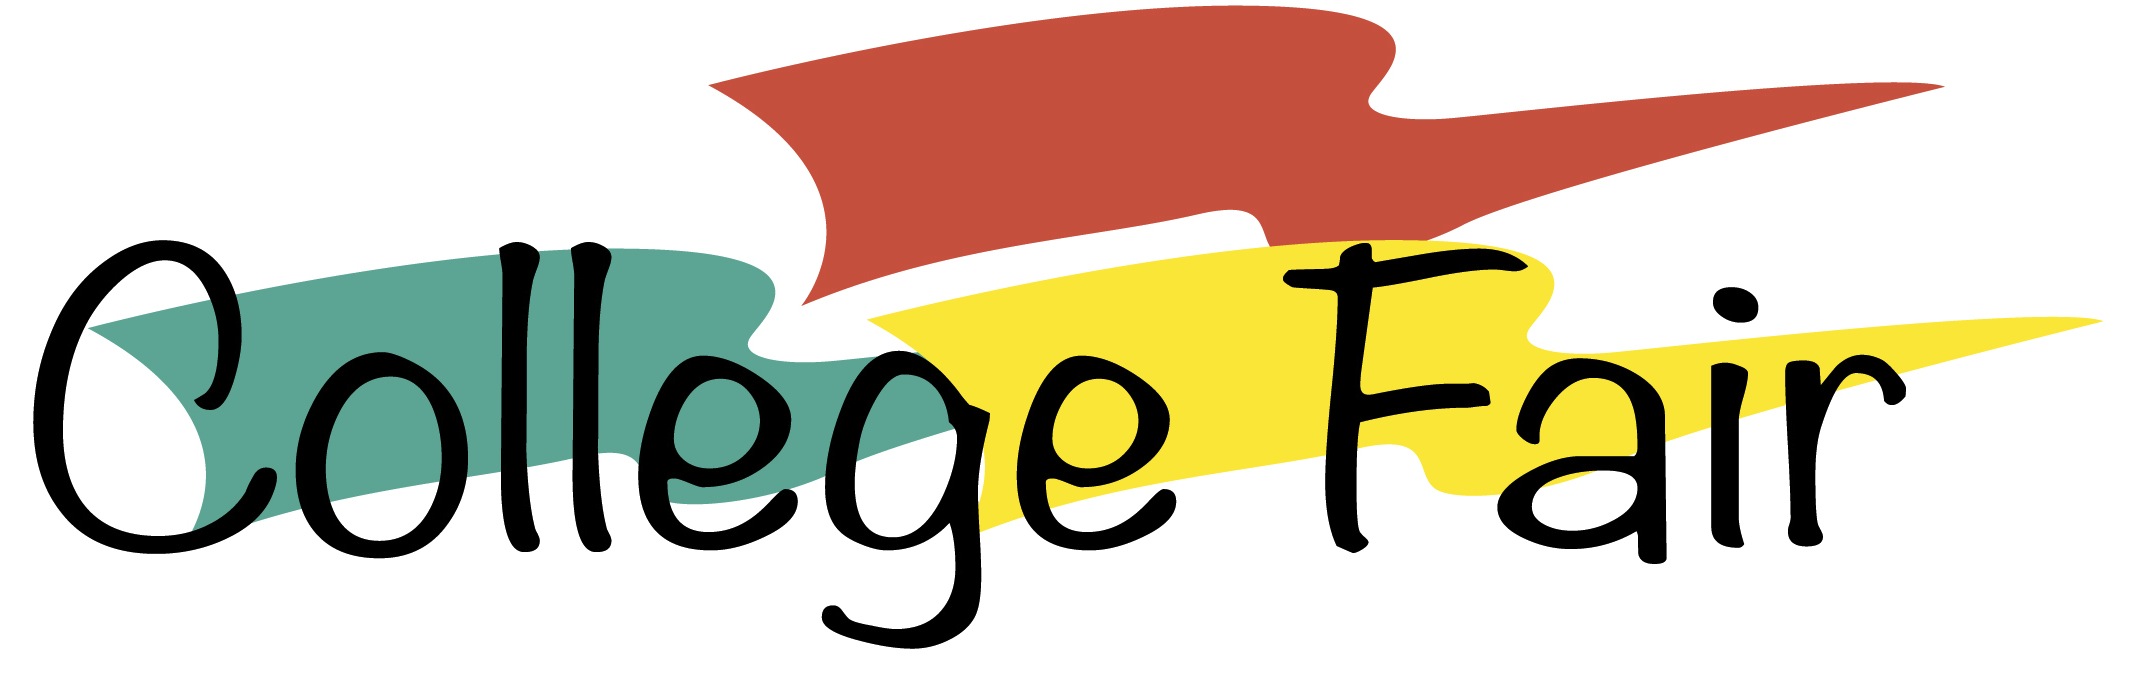 College clip art logos free clipart images image